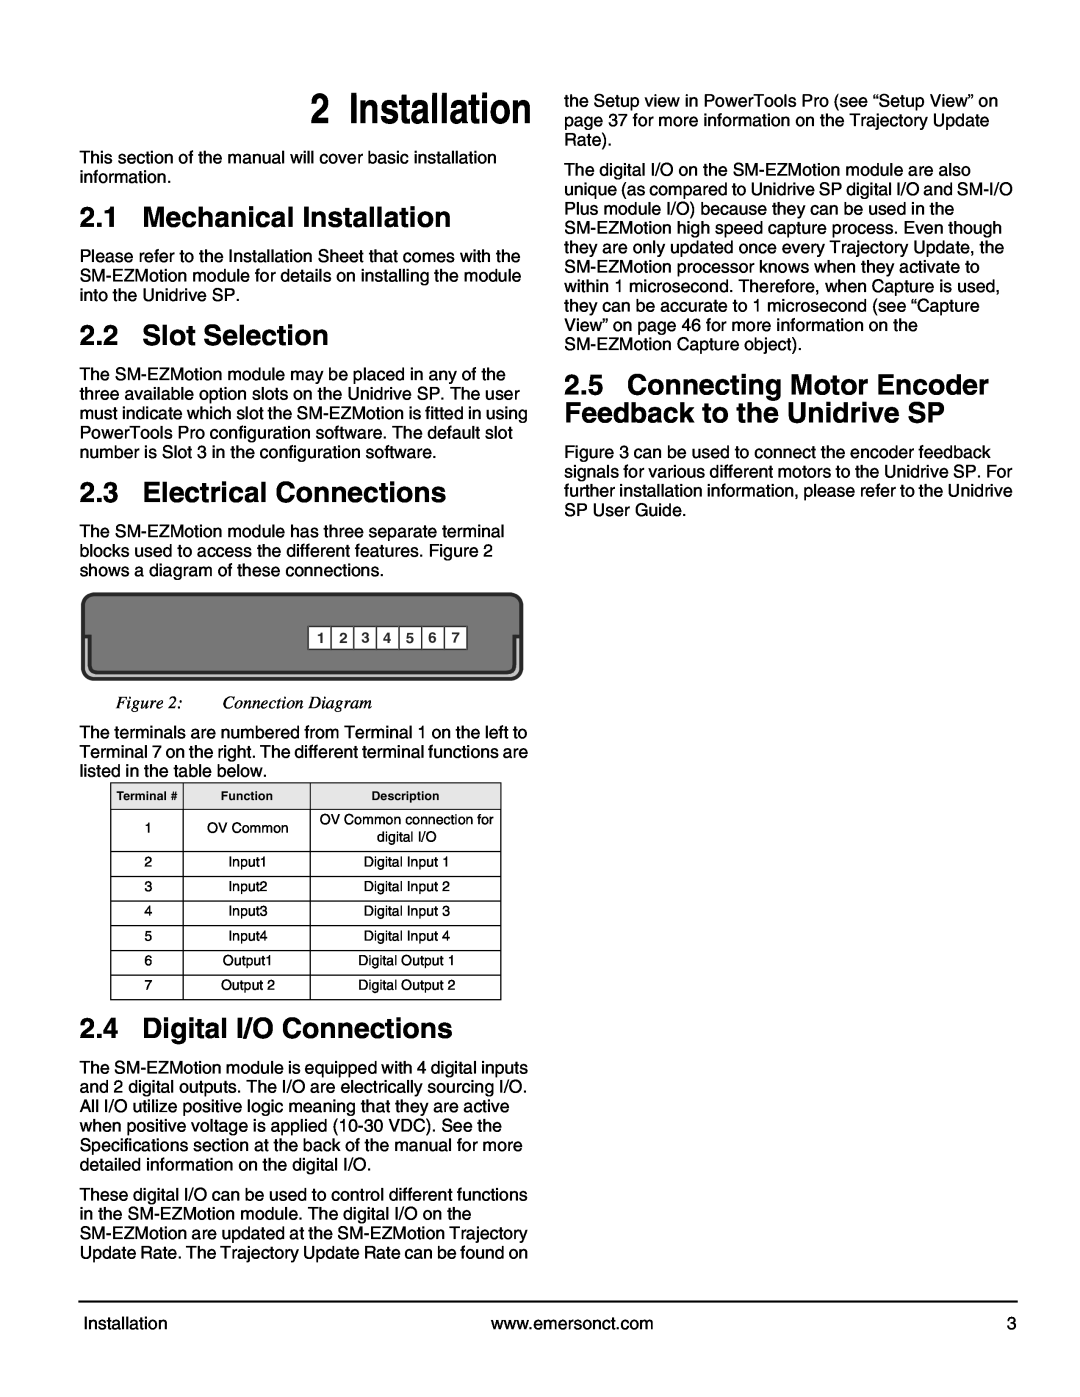 Emerson P/N 400361-00 manual Mechanical Installation, Slot Selection, Electrical Connections, Digital I/O Connections 